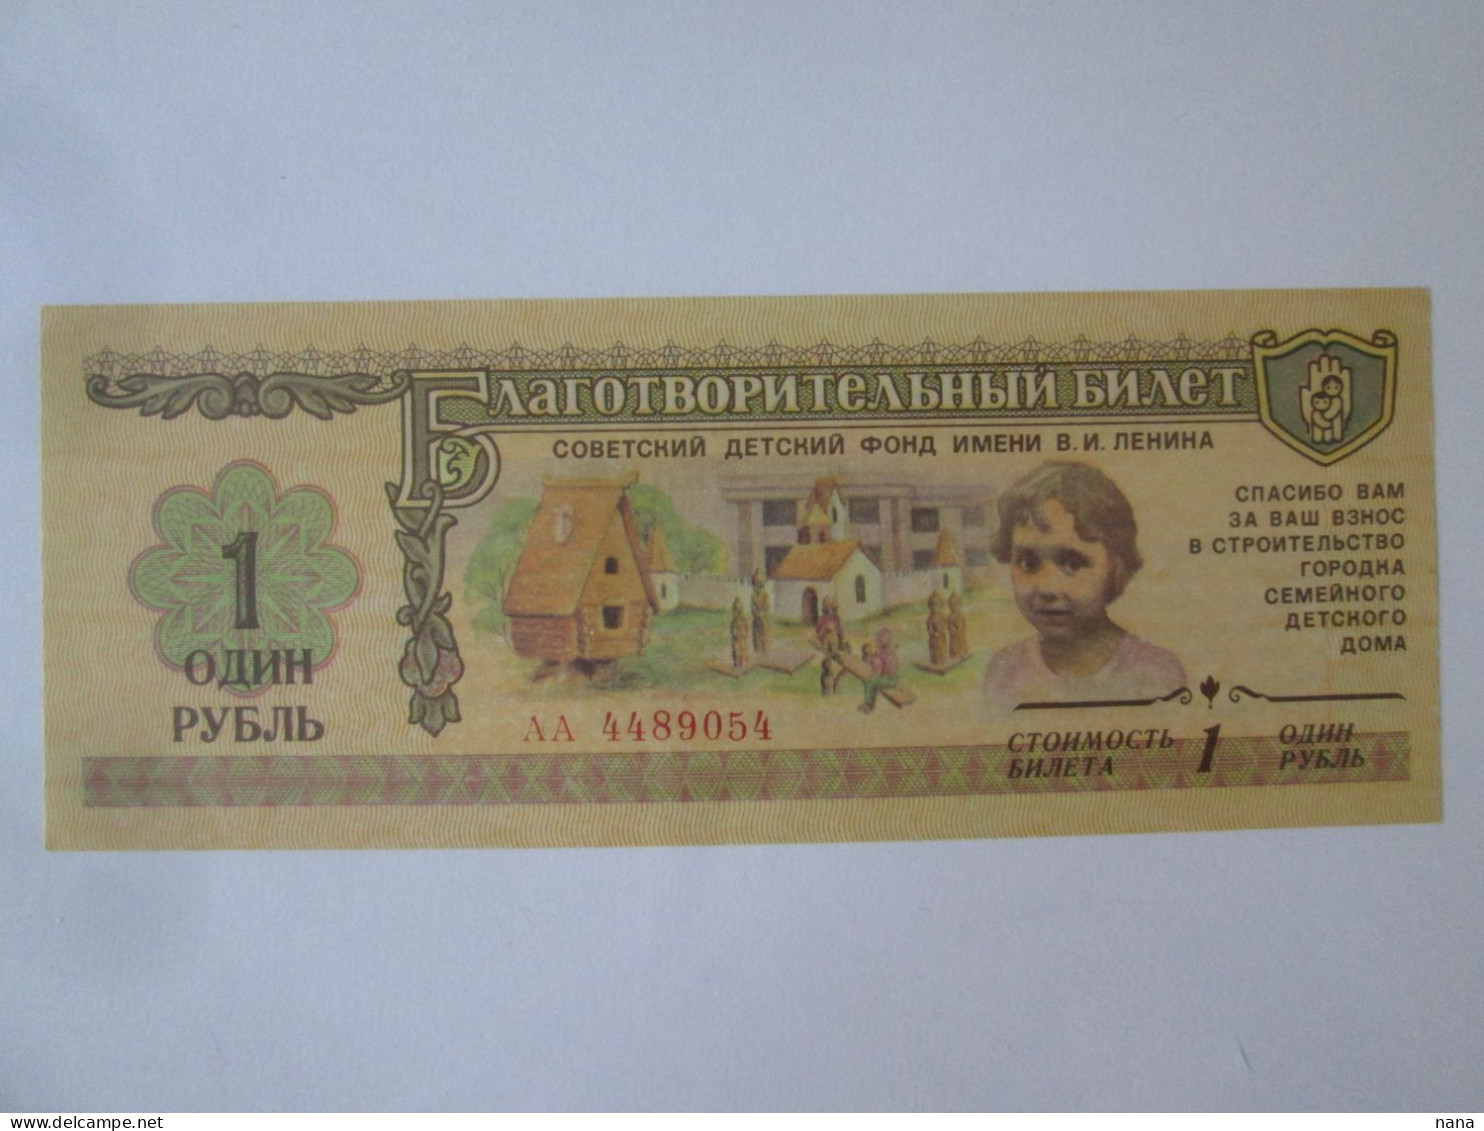 Soviet Union I.V.Lenin Fund For Children Banknote Charity Ticket 1 Ruble 1988 UNC See Pictures - Other - Europe